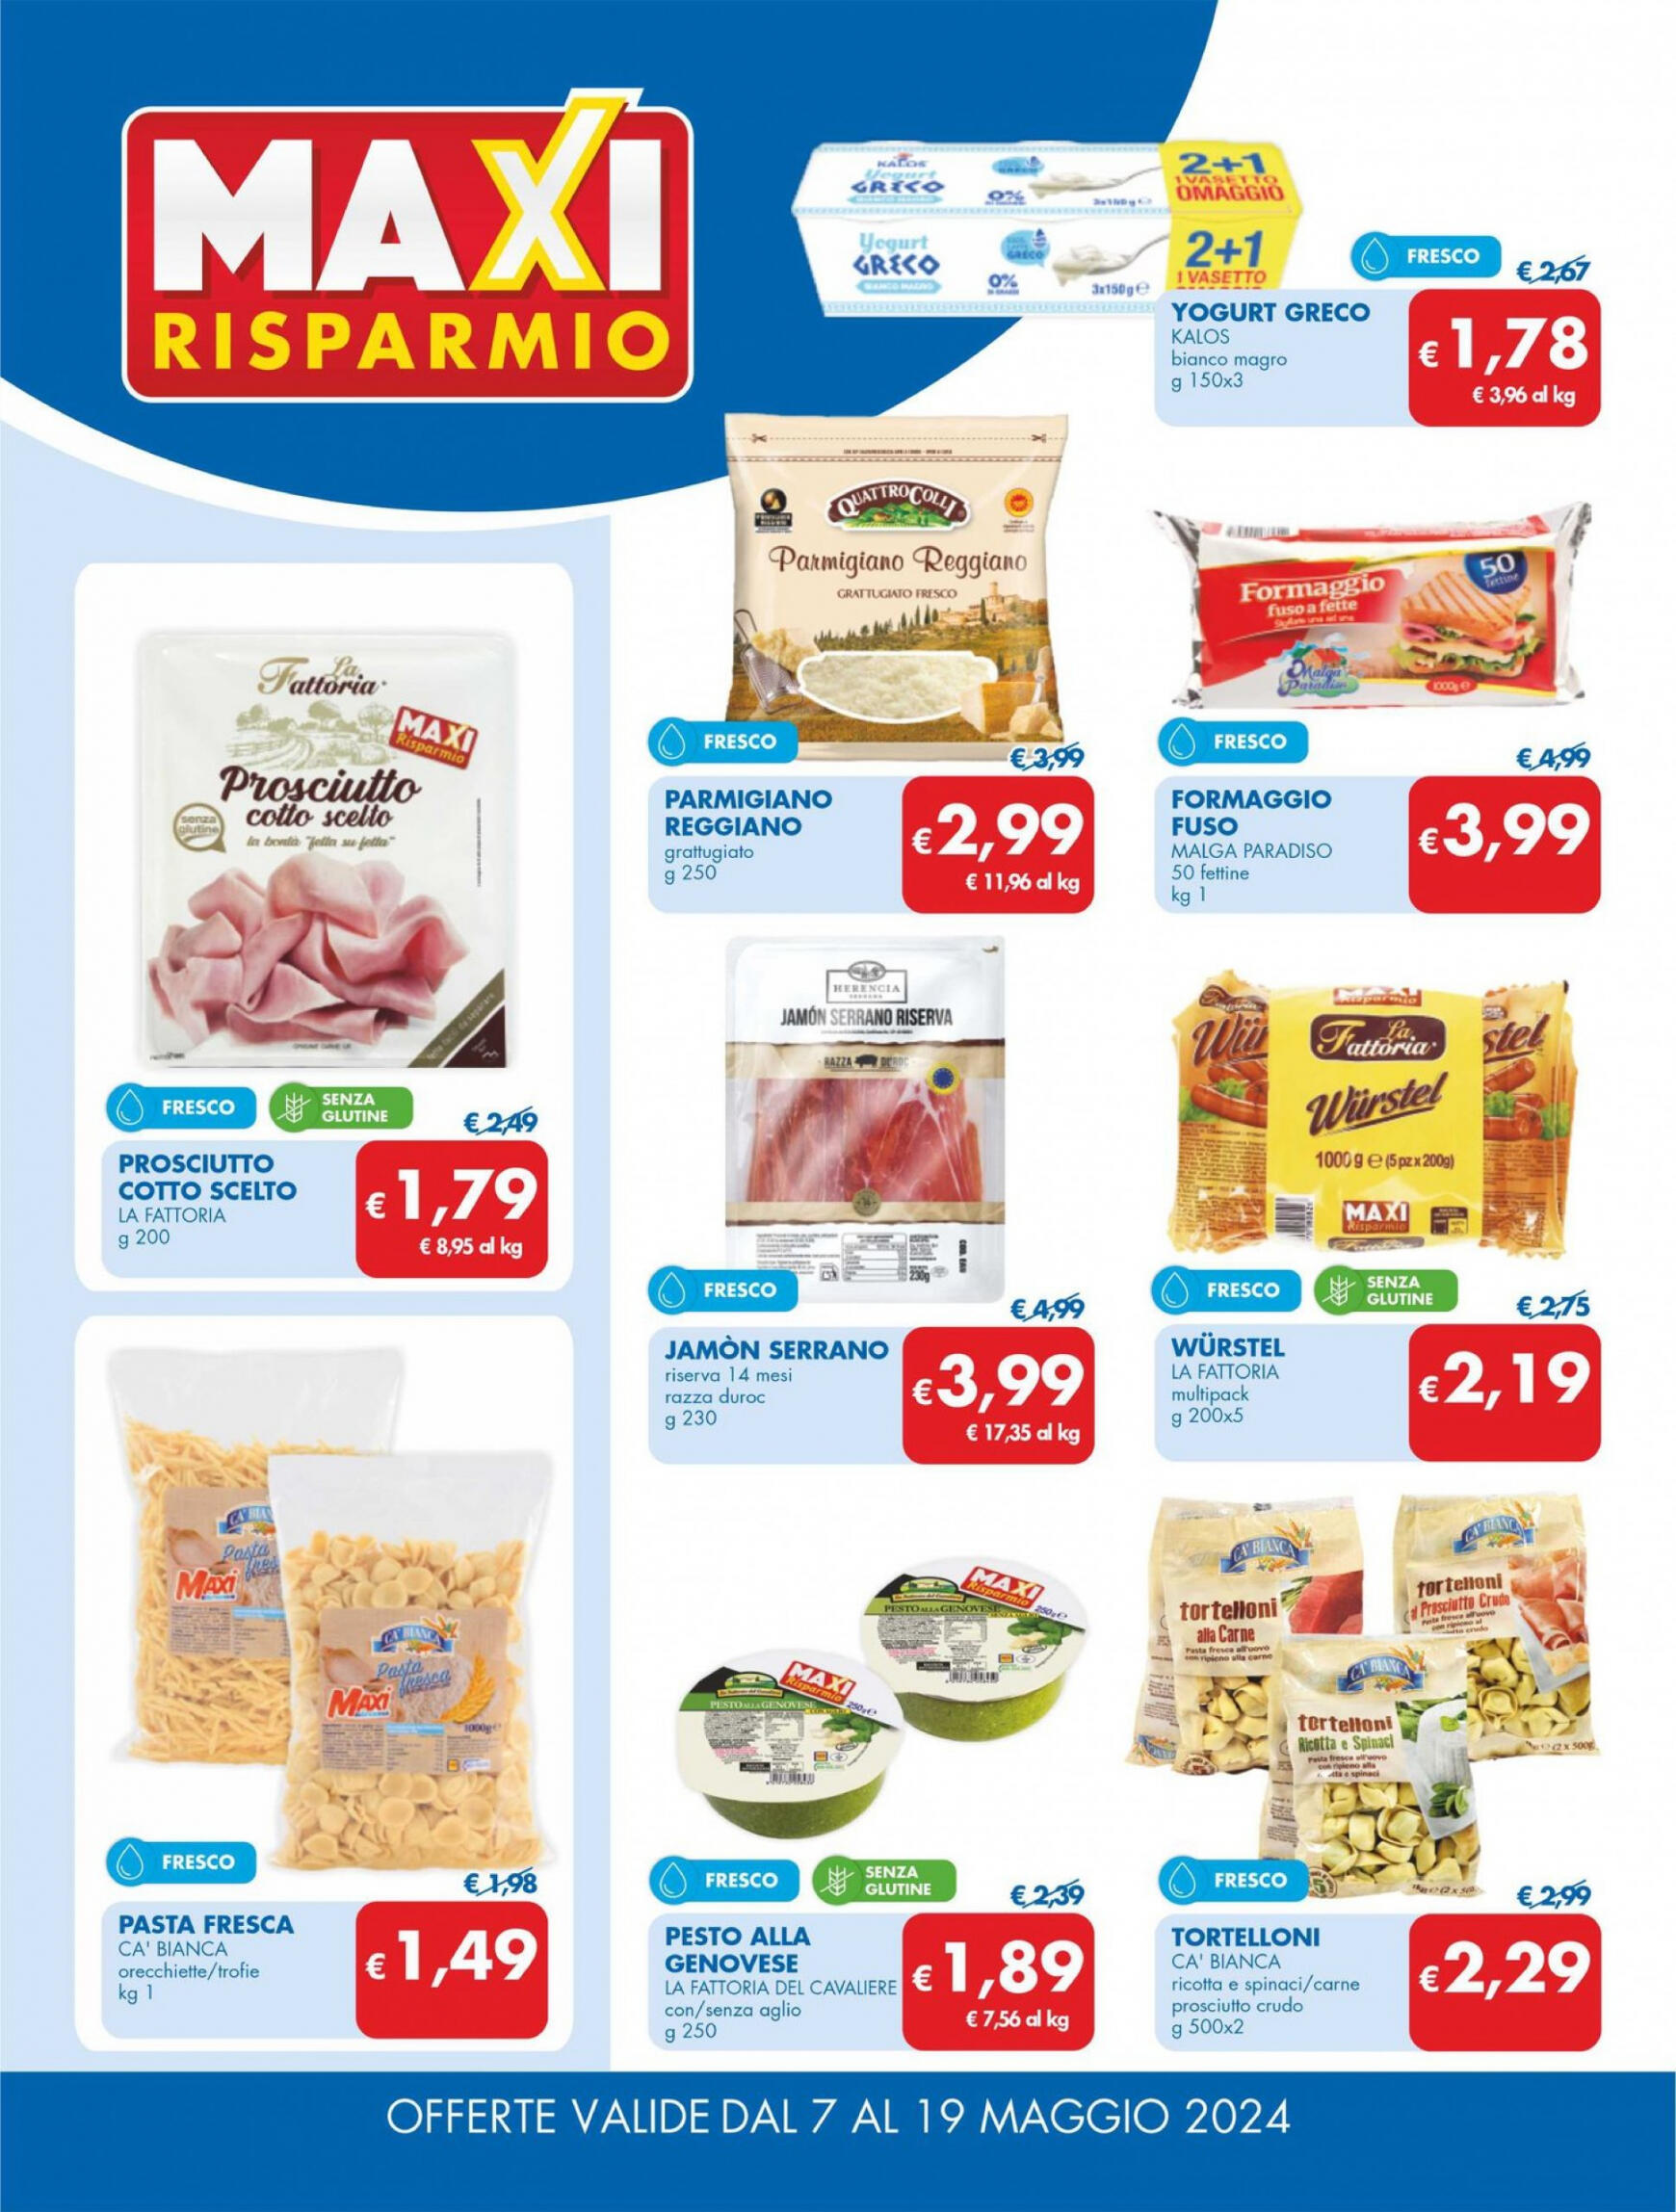 md-discount - Nuovo volantino MD - MD Discount 07.05. - 19.05. - page: 2